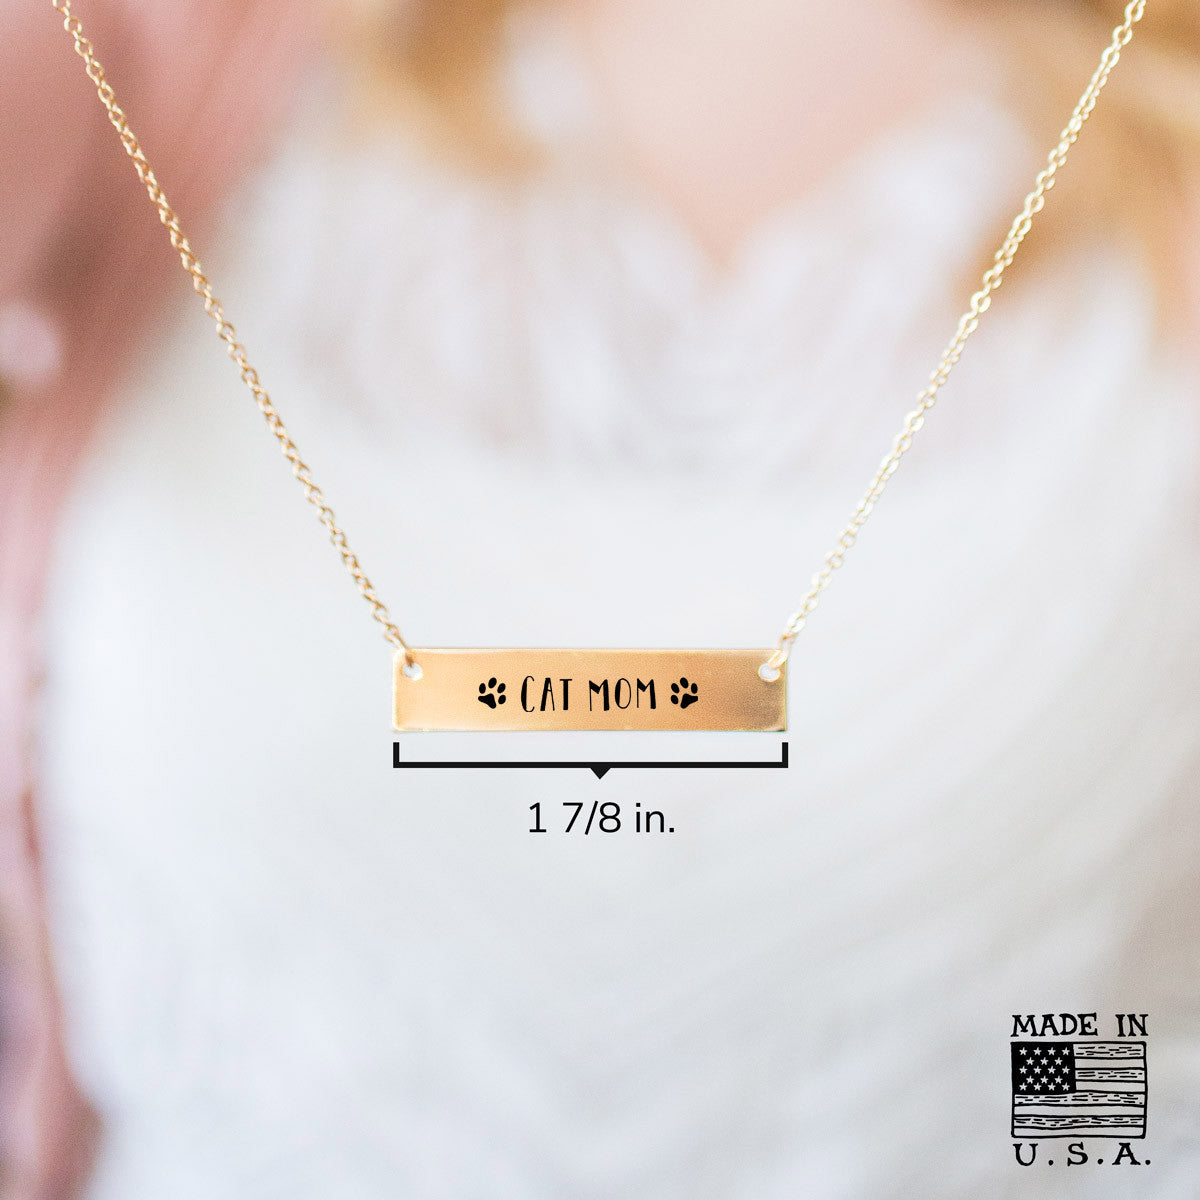 Cat Mom Gold / Silver Bar Necklace - pipercleo.com